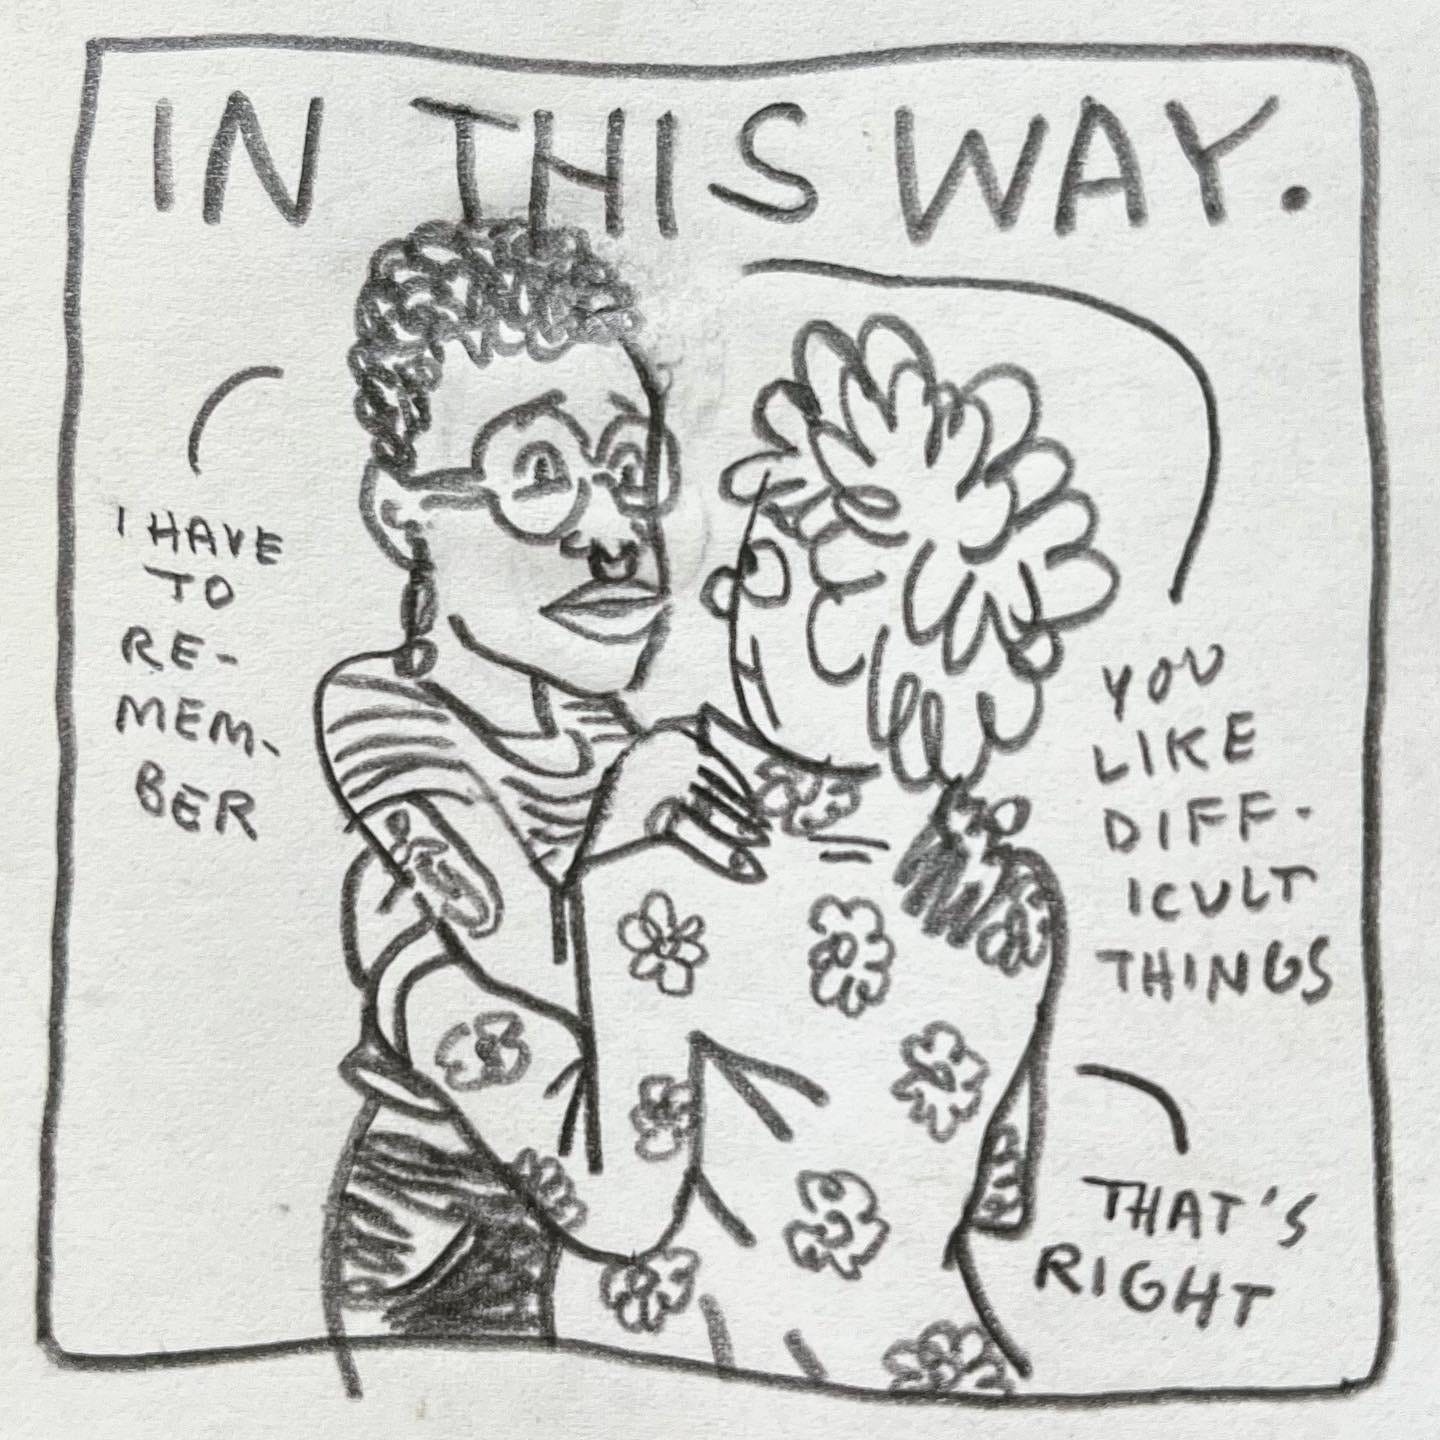 Panel 5: in this way. Image: Maze and Lark are standing, arms around each other, looking into one another's eyes. Lark is wearing a floral overshirt. Maze says "I have to remember you like difficult things.” Lark replies "that's right"